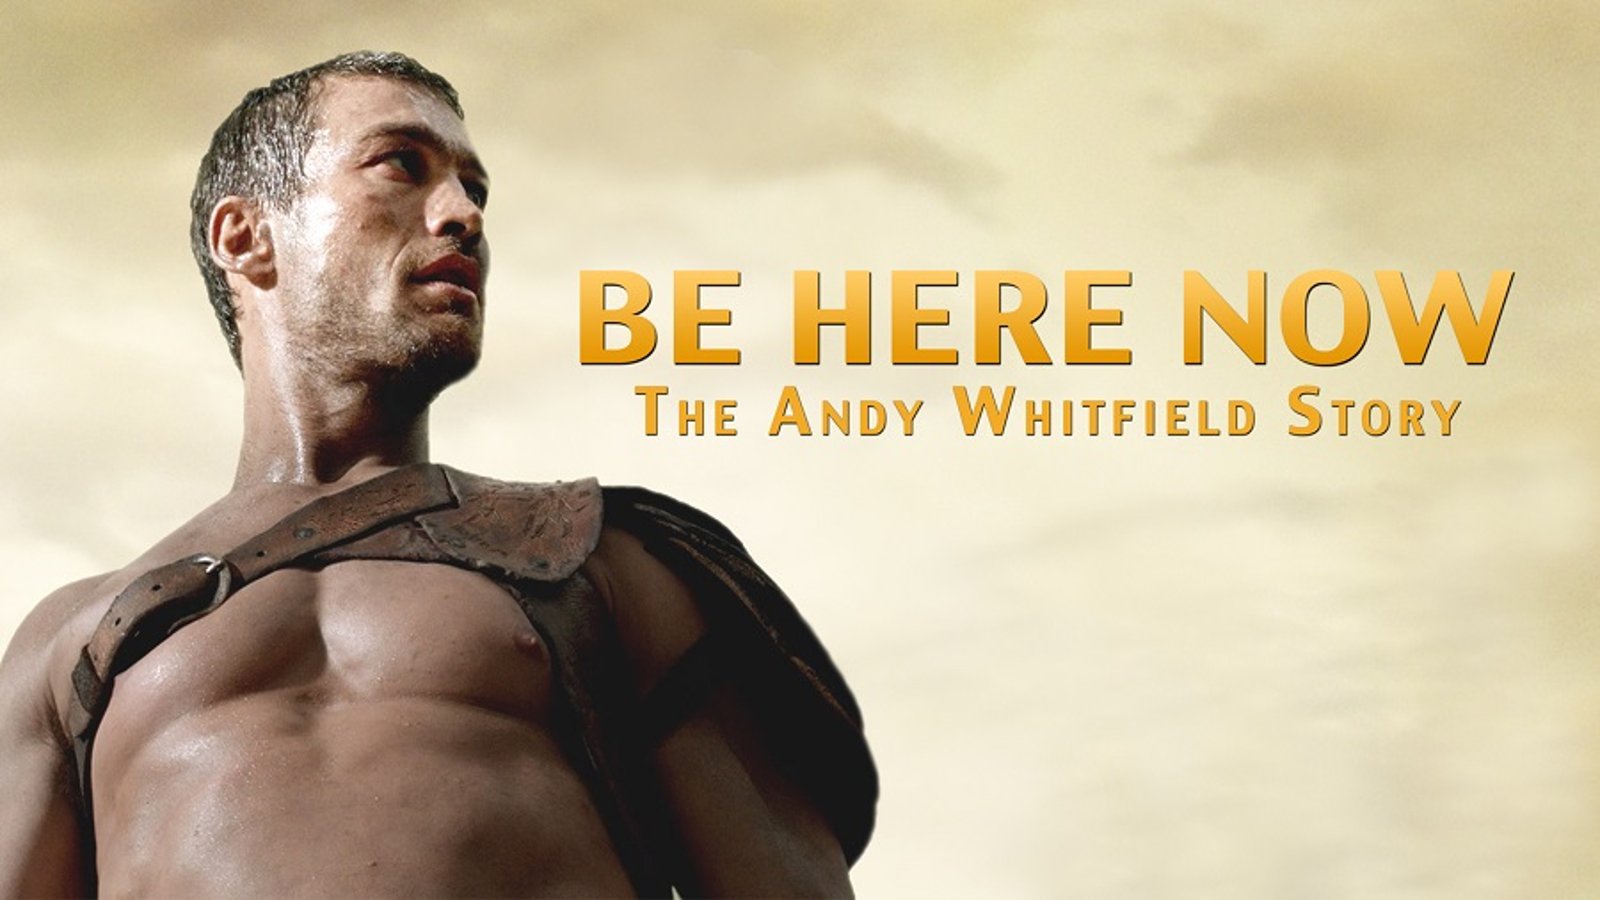 Be Here Now: The Andy Whitfield Story - An Actor Battles Cancer with the Help of His Family